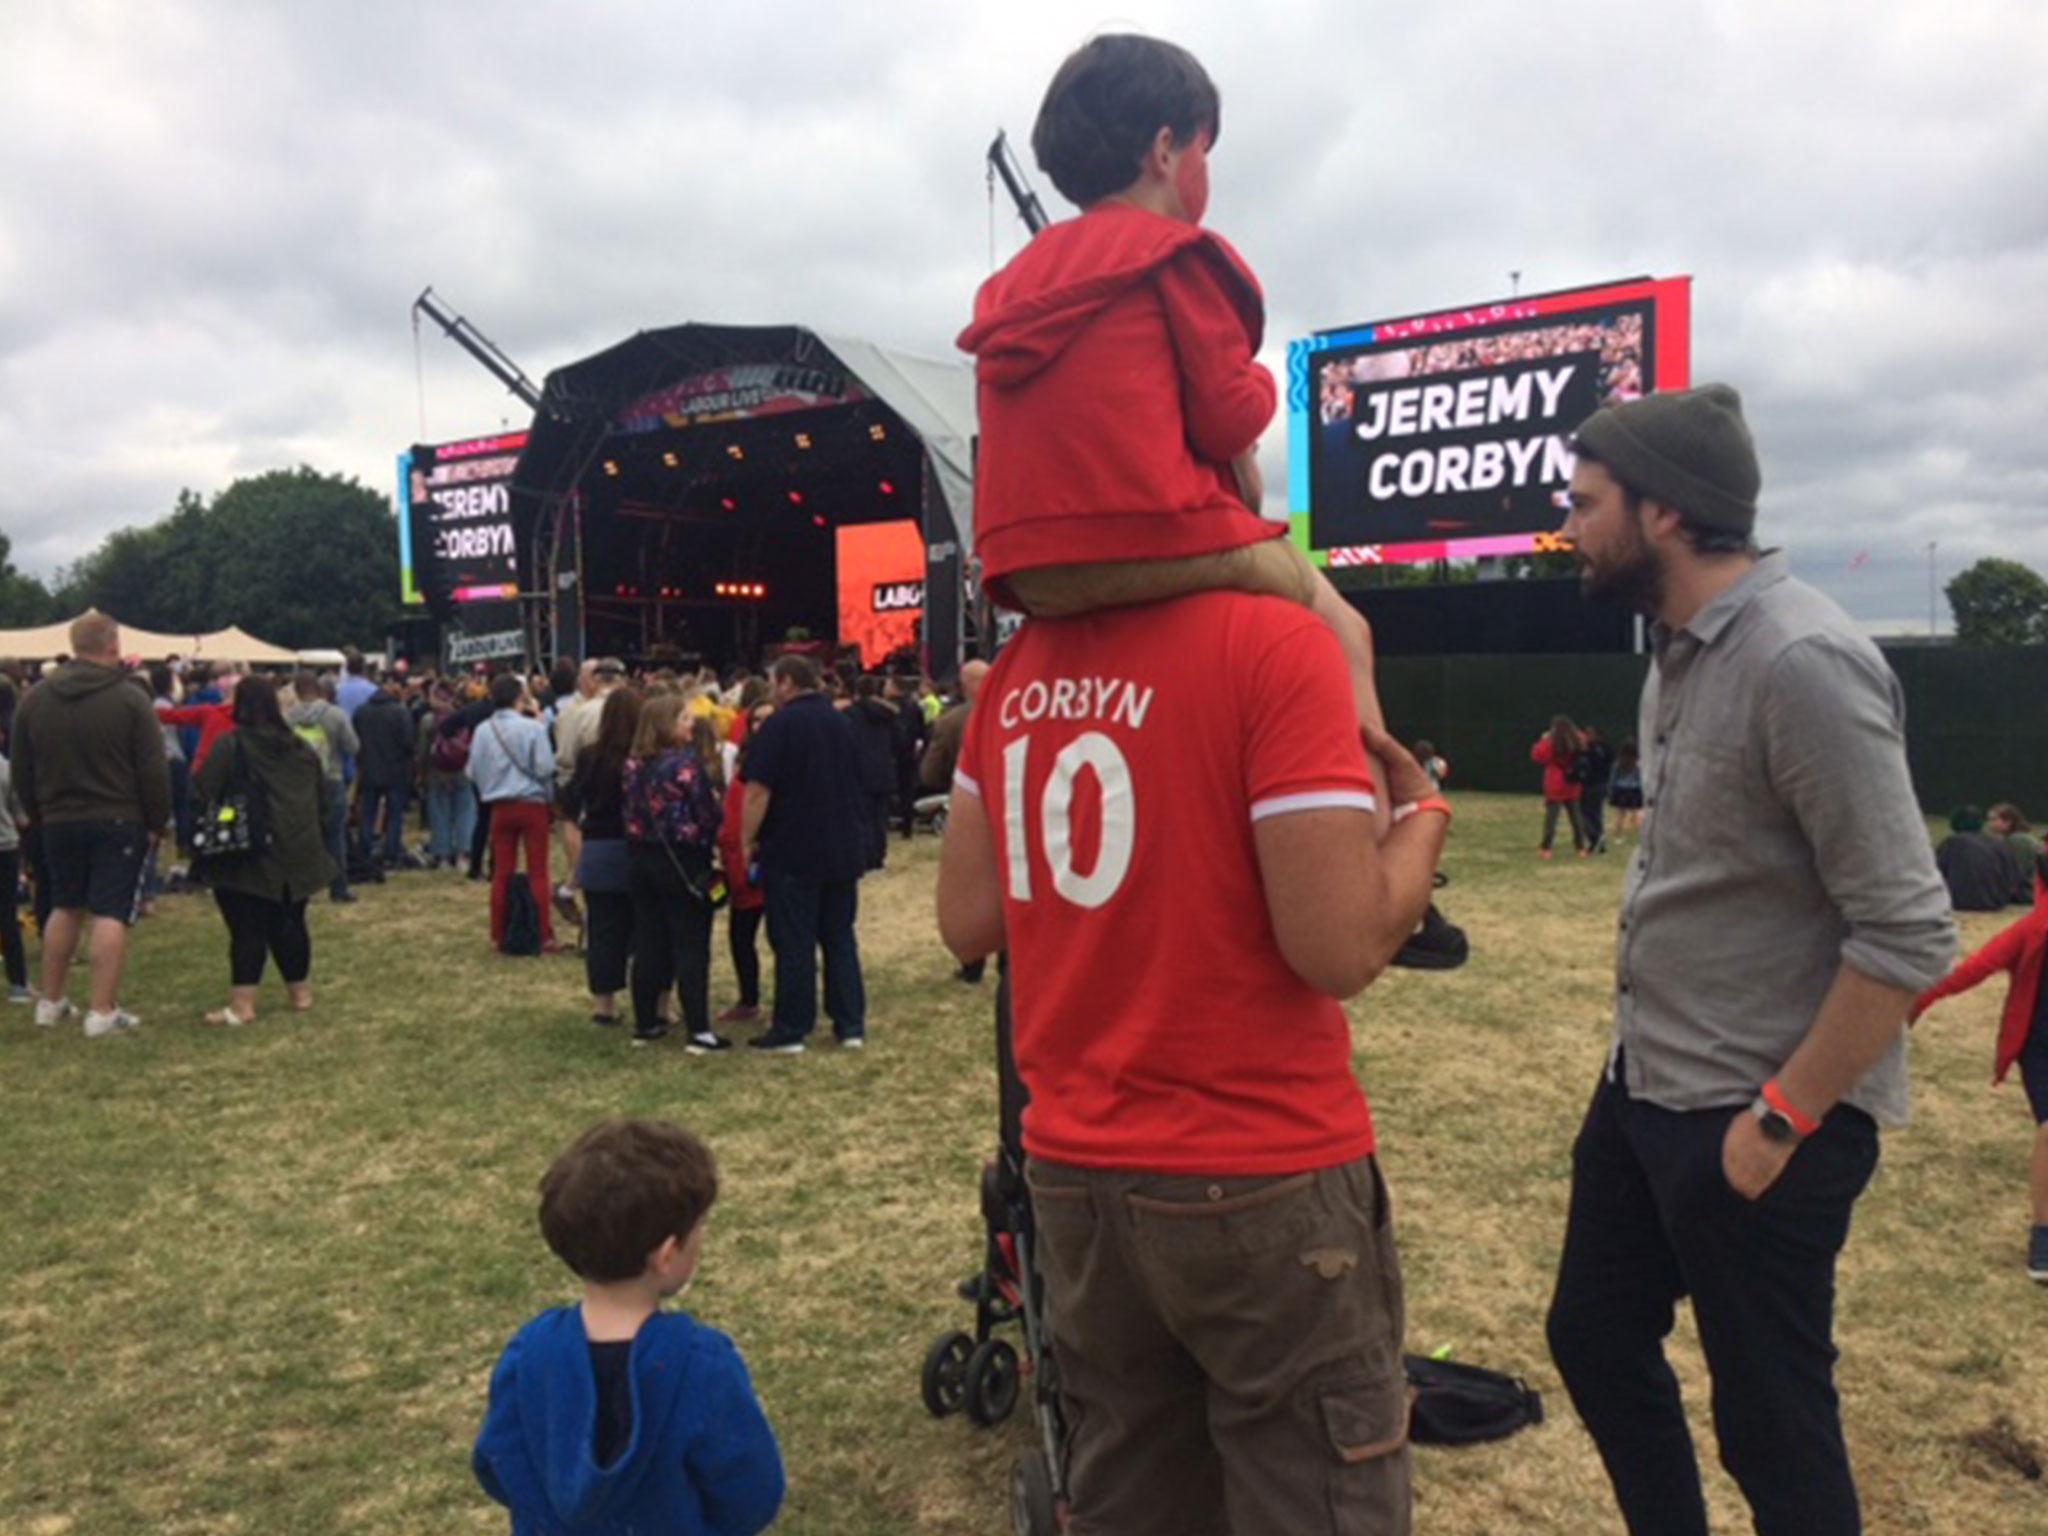 White Hart Lane Recreation Ground in Haringey was turned over to the Jeremy Corbyn faithful